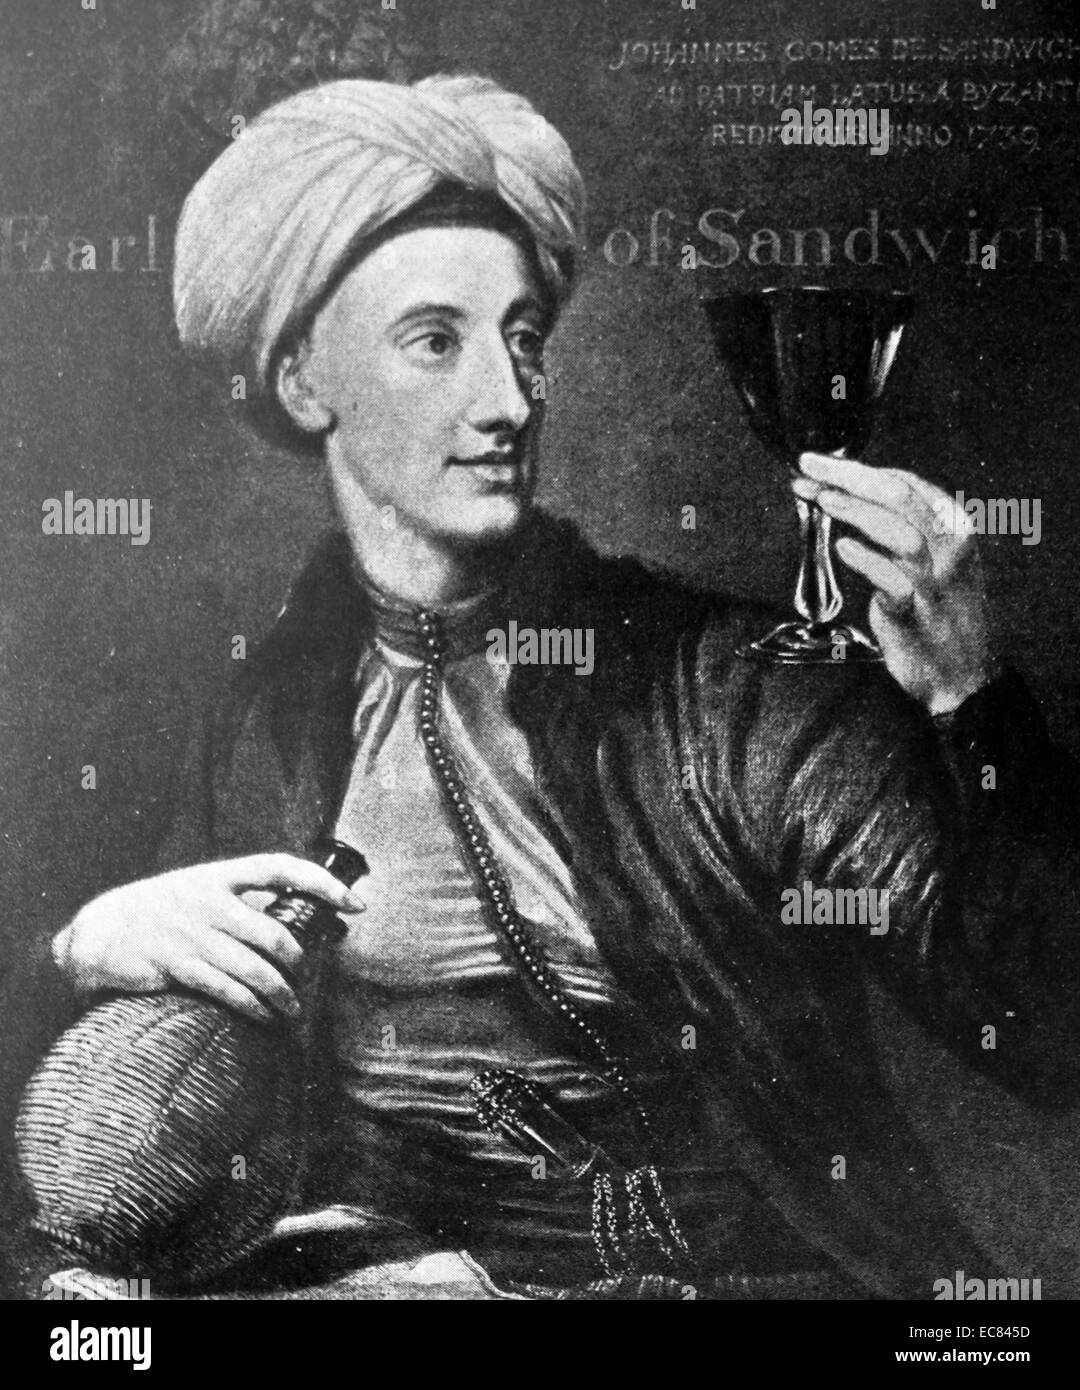 John Montagu; 4th Earl of Sandwich; (1718 – 30 April 1792); British statesman who held various military and political offices; including Postmaster General; First Lord of the Admiralty and Secretary of State for the Northern Department. best known for the claim that he was the eponymous inventor of the sandwich. Stock Photo